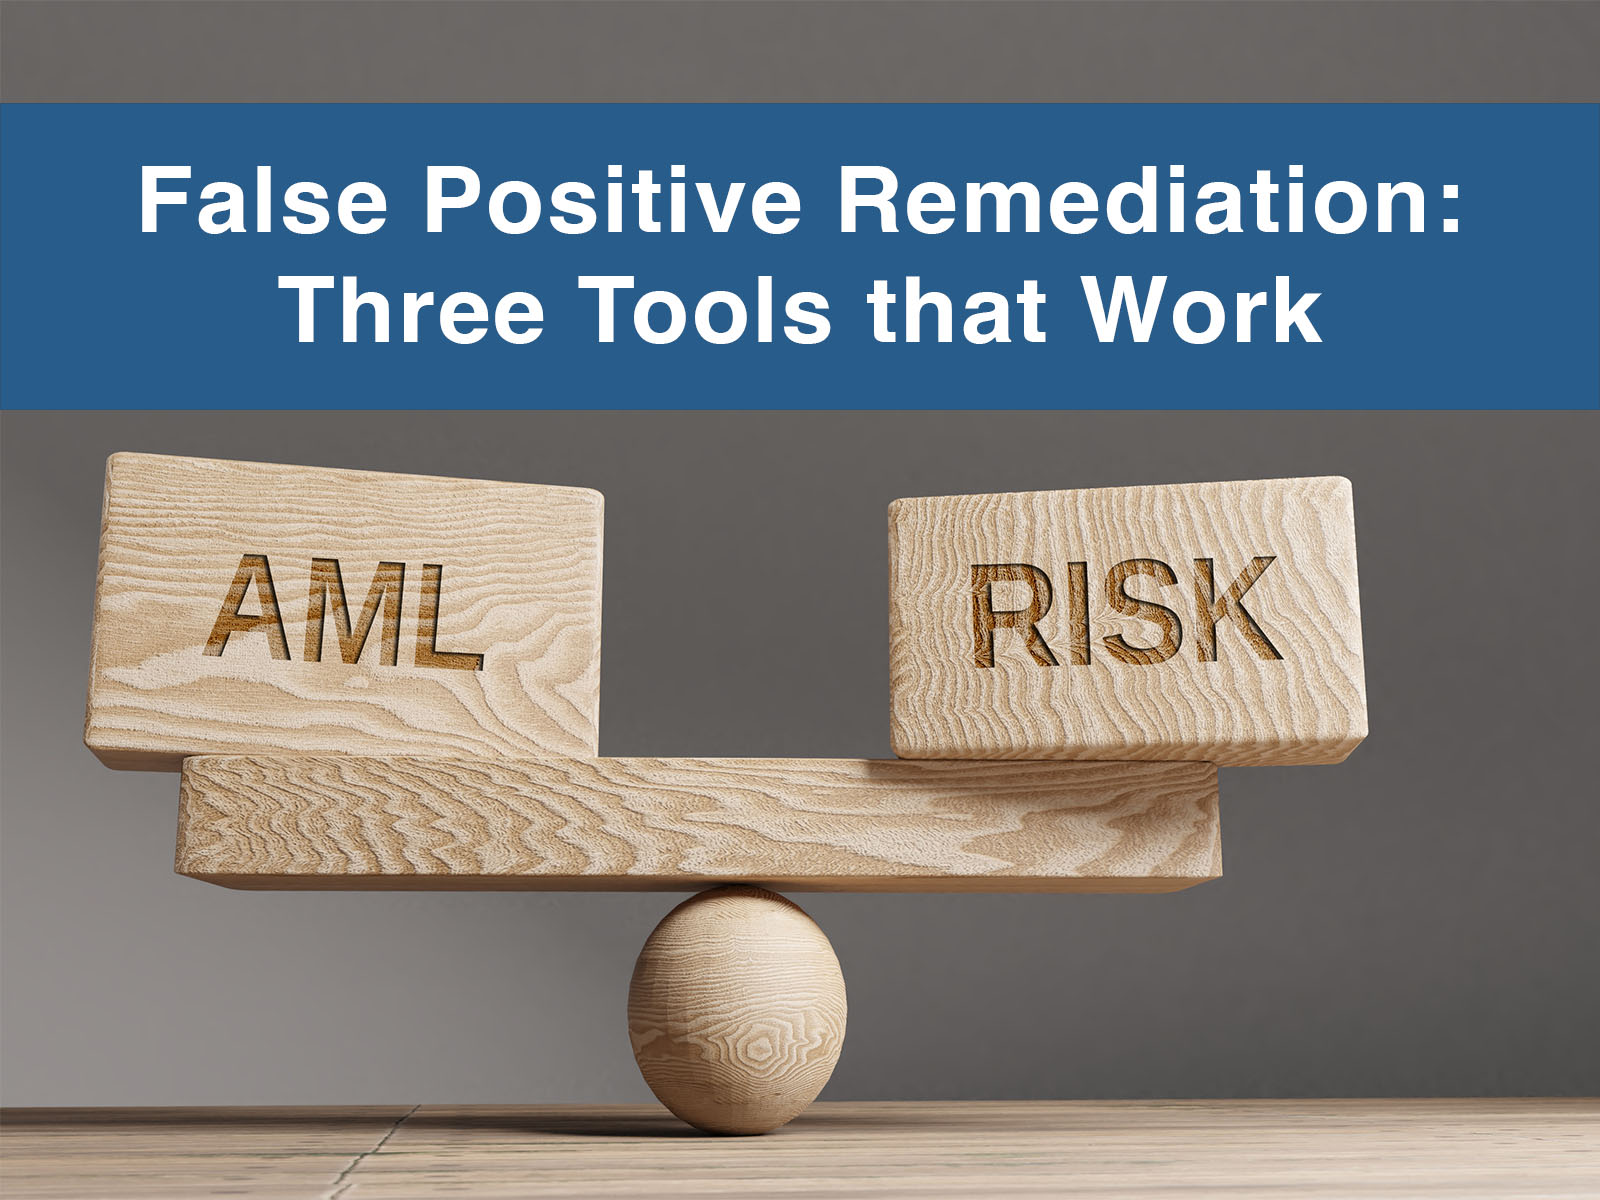 Image shows a balance bar on a ball--with text "AML" and "Risk" Text above the image: False positive remediation--Three key tools The image related to AML Compliance and the importance of false positive remediation in transaction monitoring and sanctions screening.